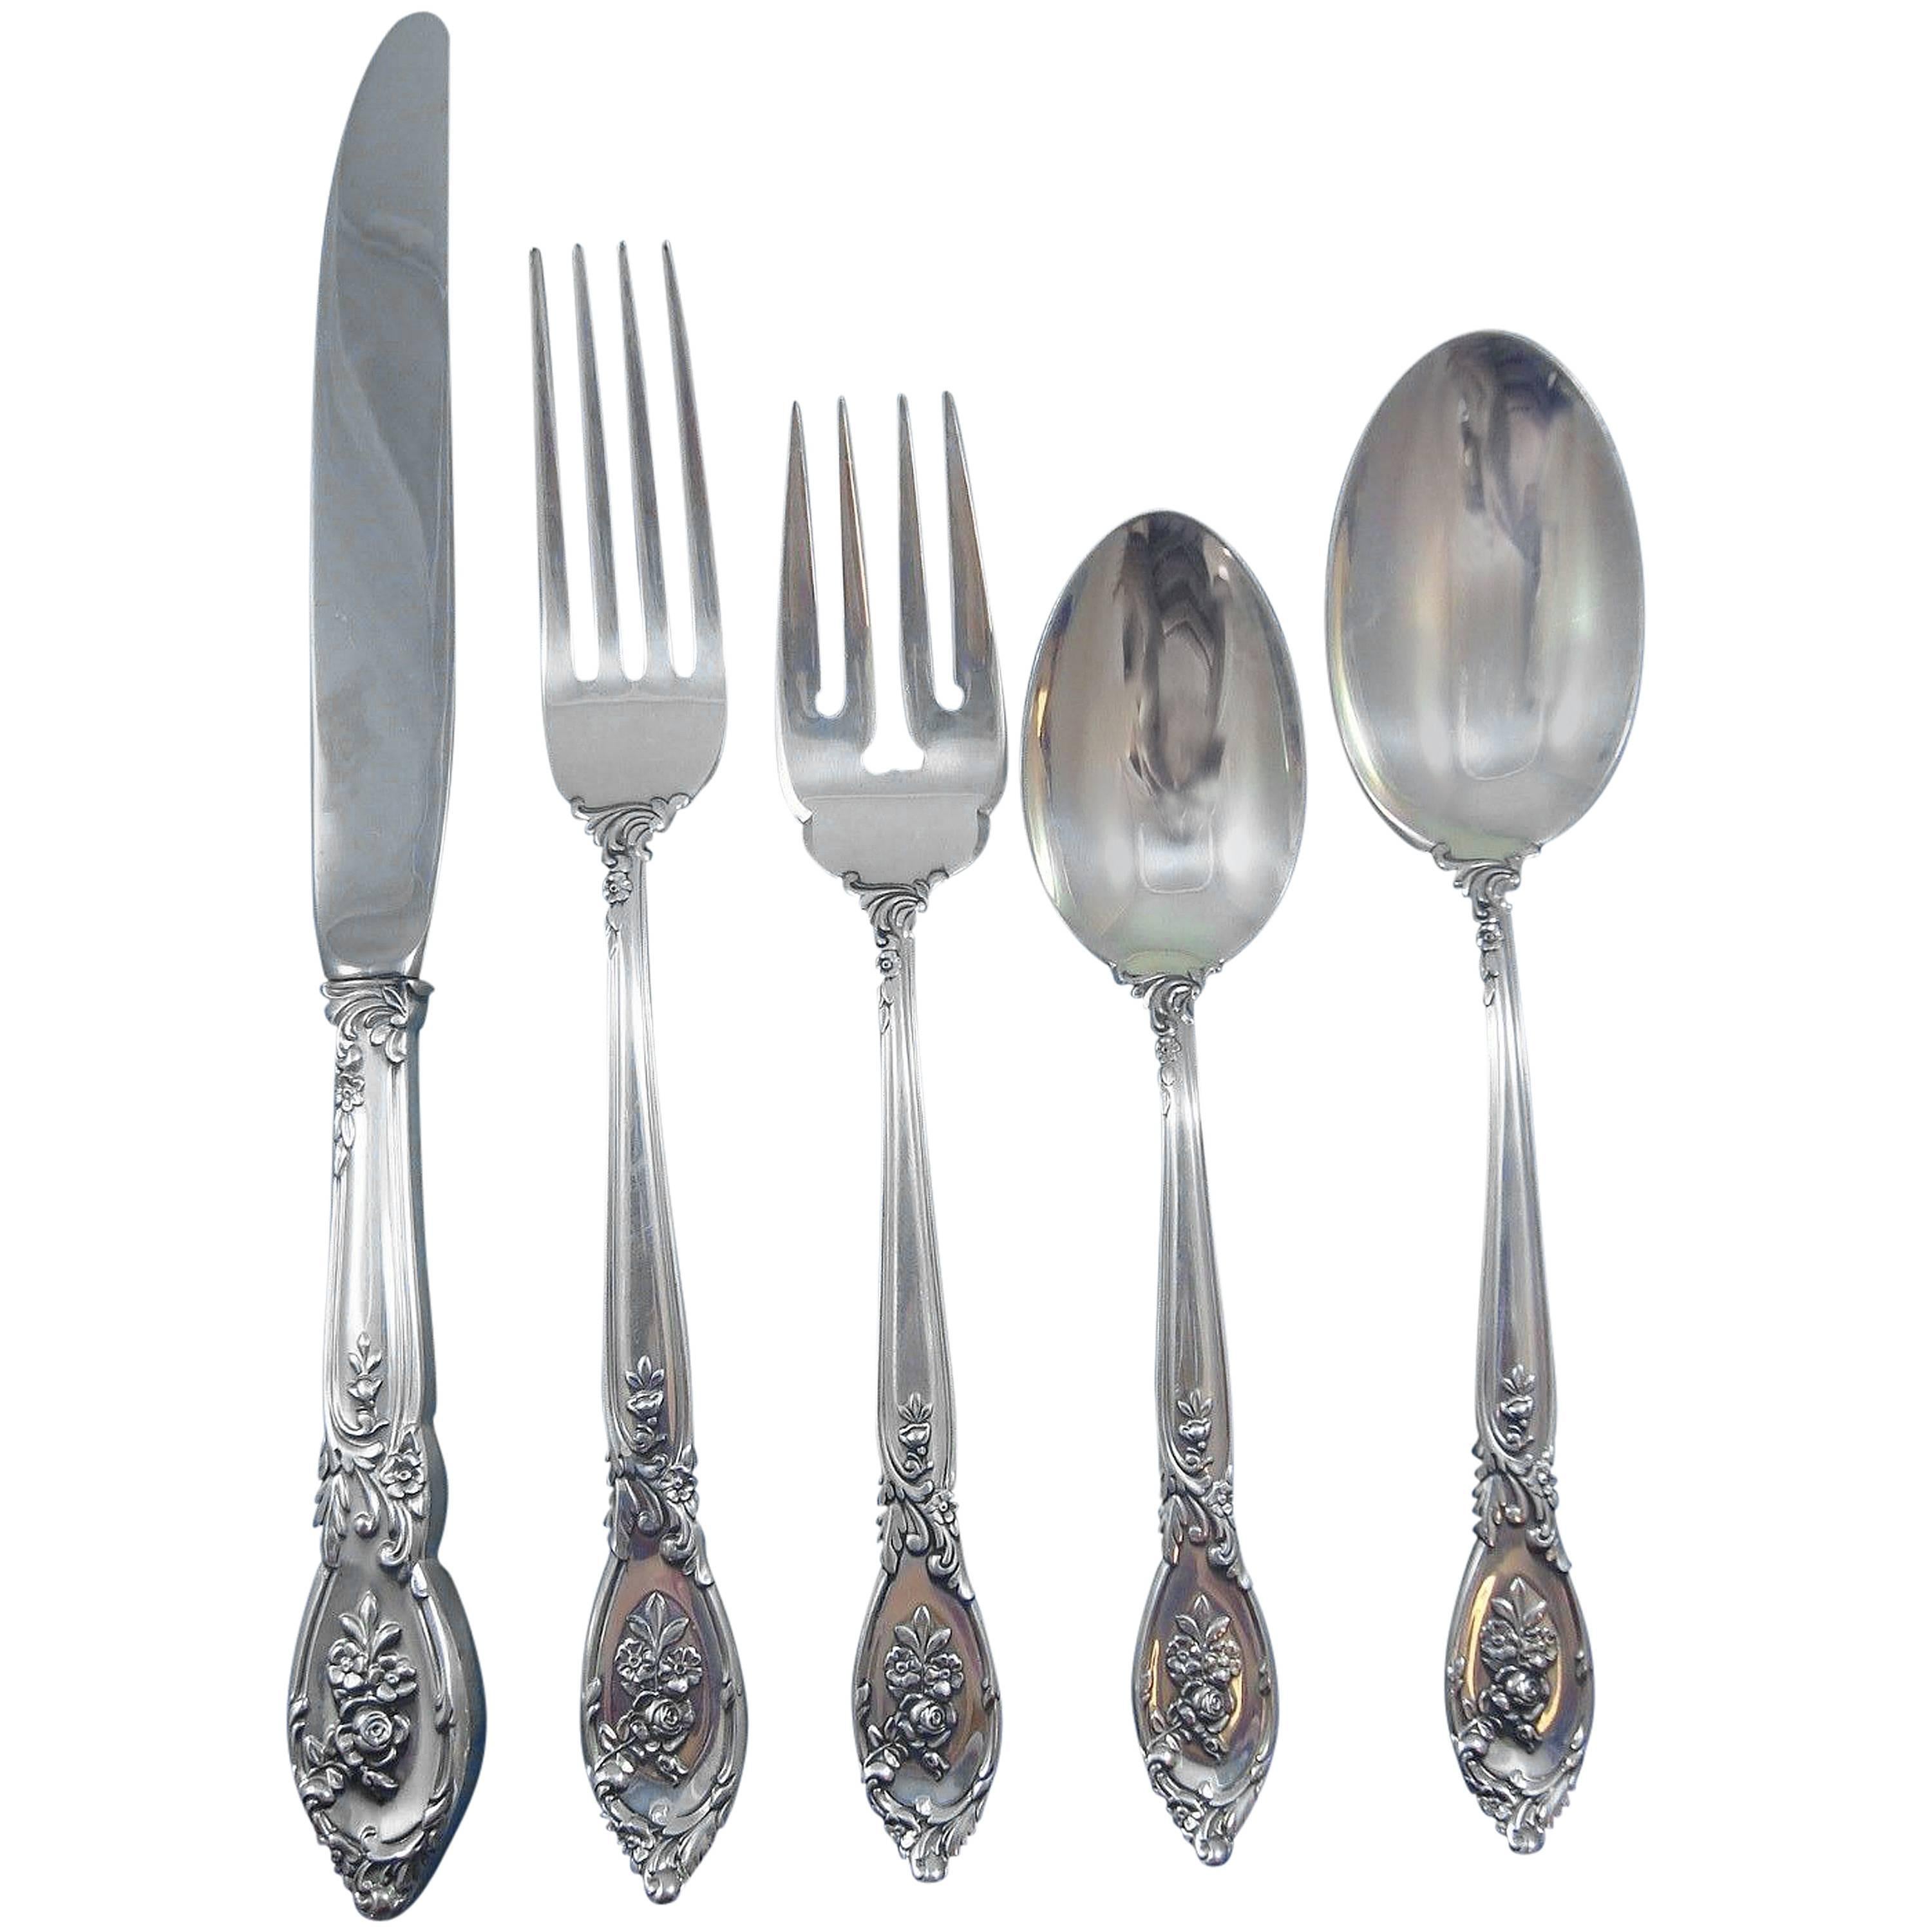 Rose Elegance by Lunt Sterling Silver Flatware Service Set of 63 Pieces